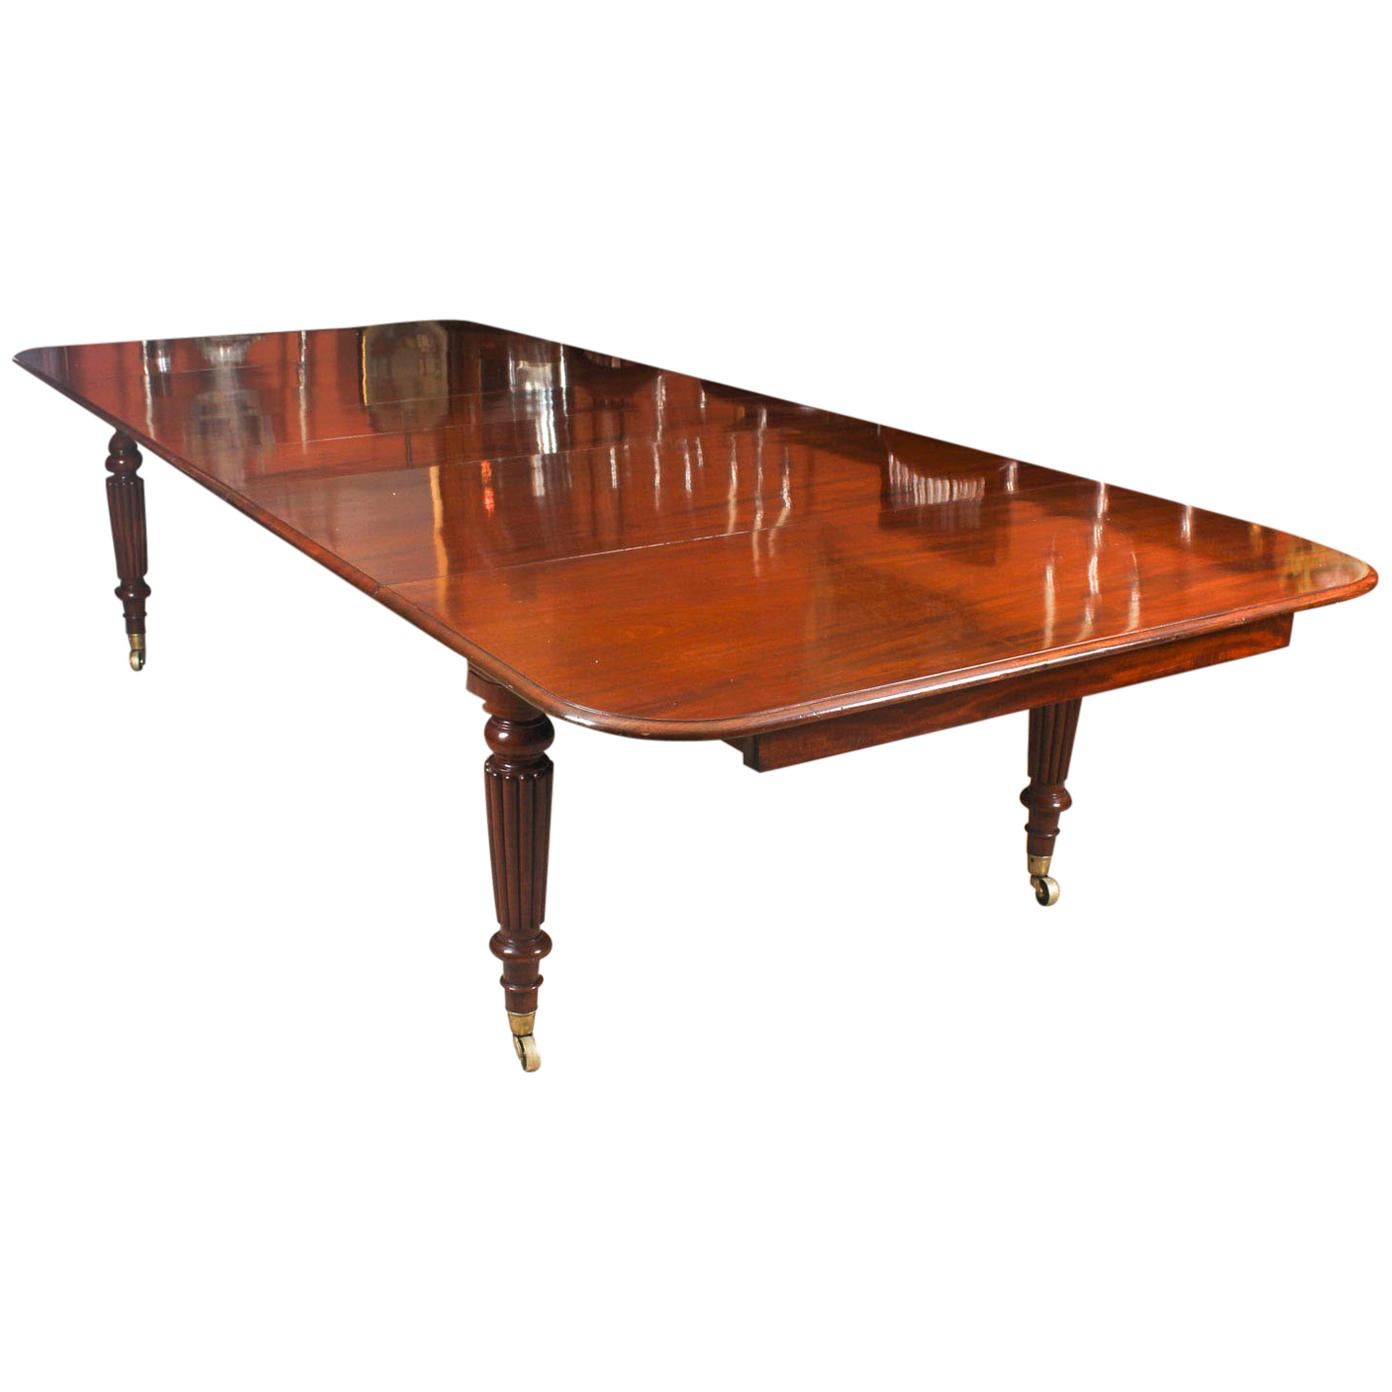 19th Century Flame Mahogany Extending Dining Table